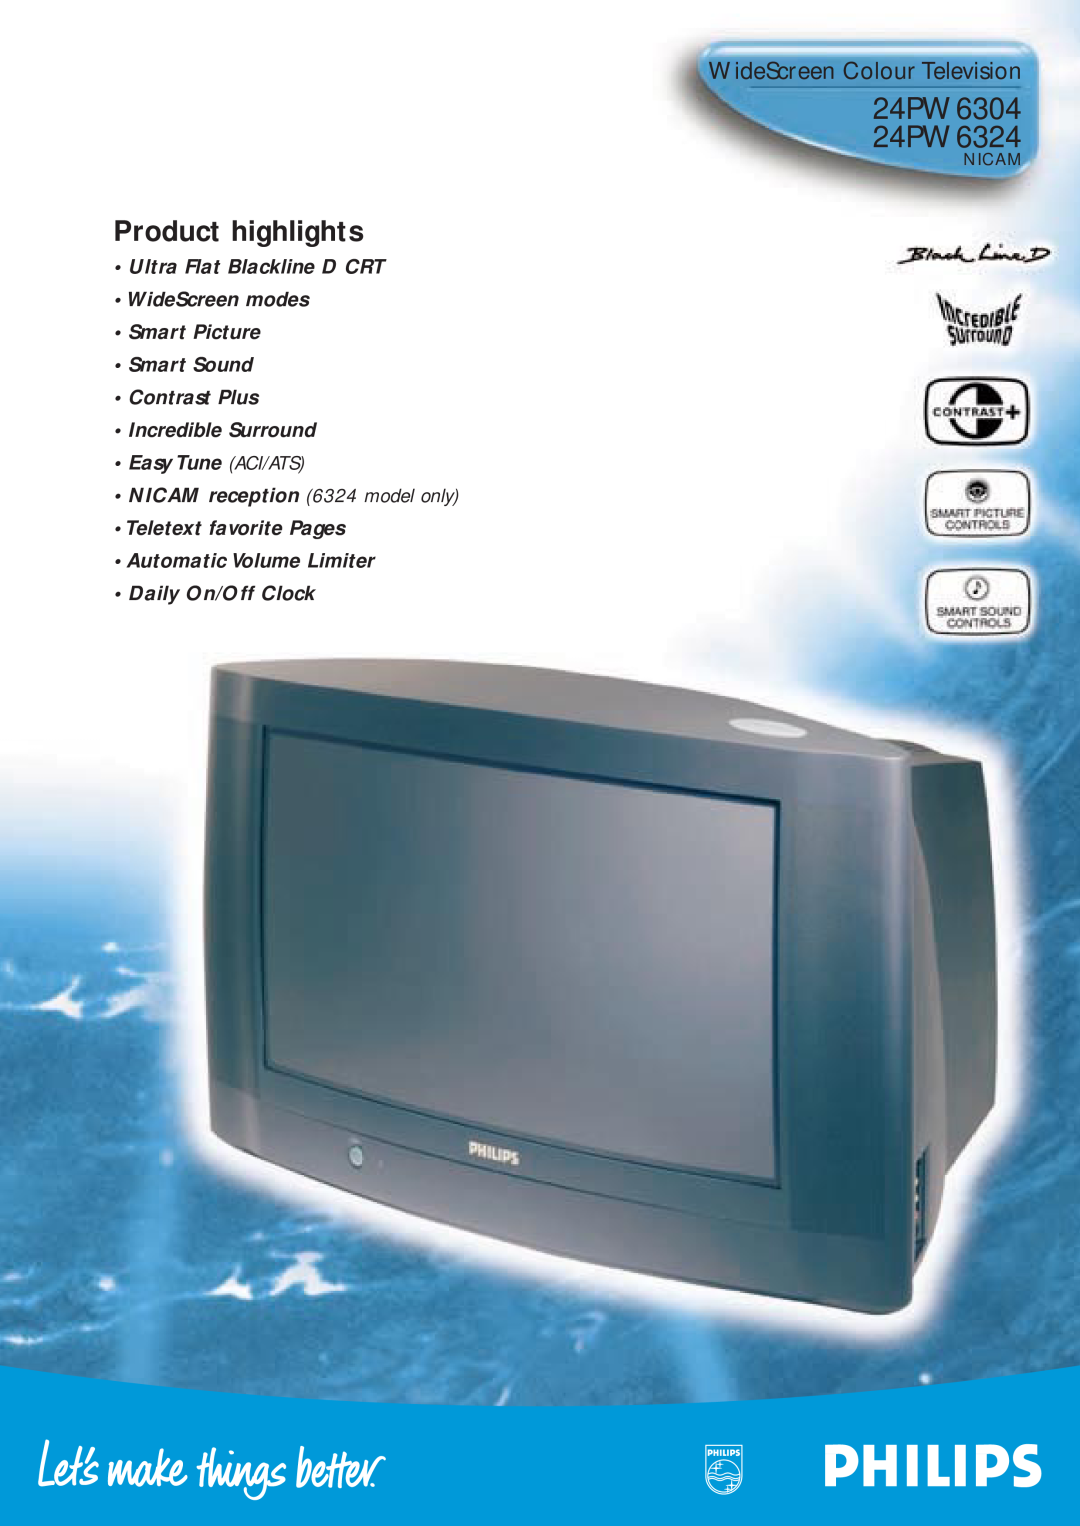 Philips manual 24PW6304 24PW6324, WideScreen Colour Television, Nicam, Product highlights 